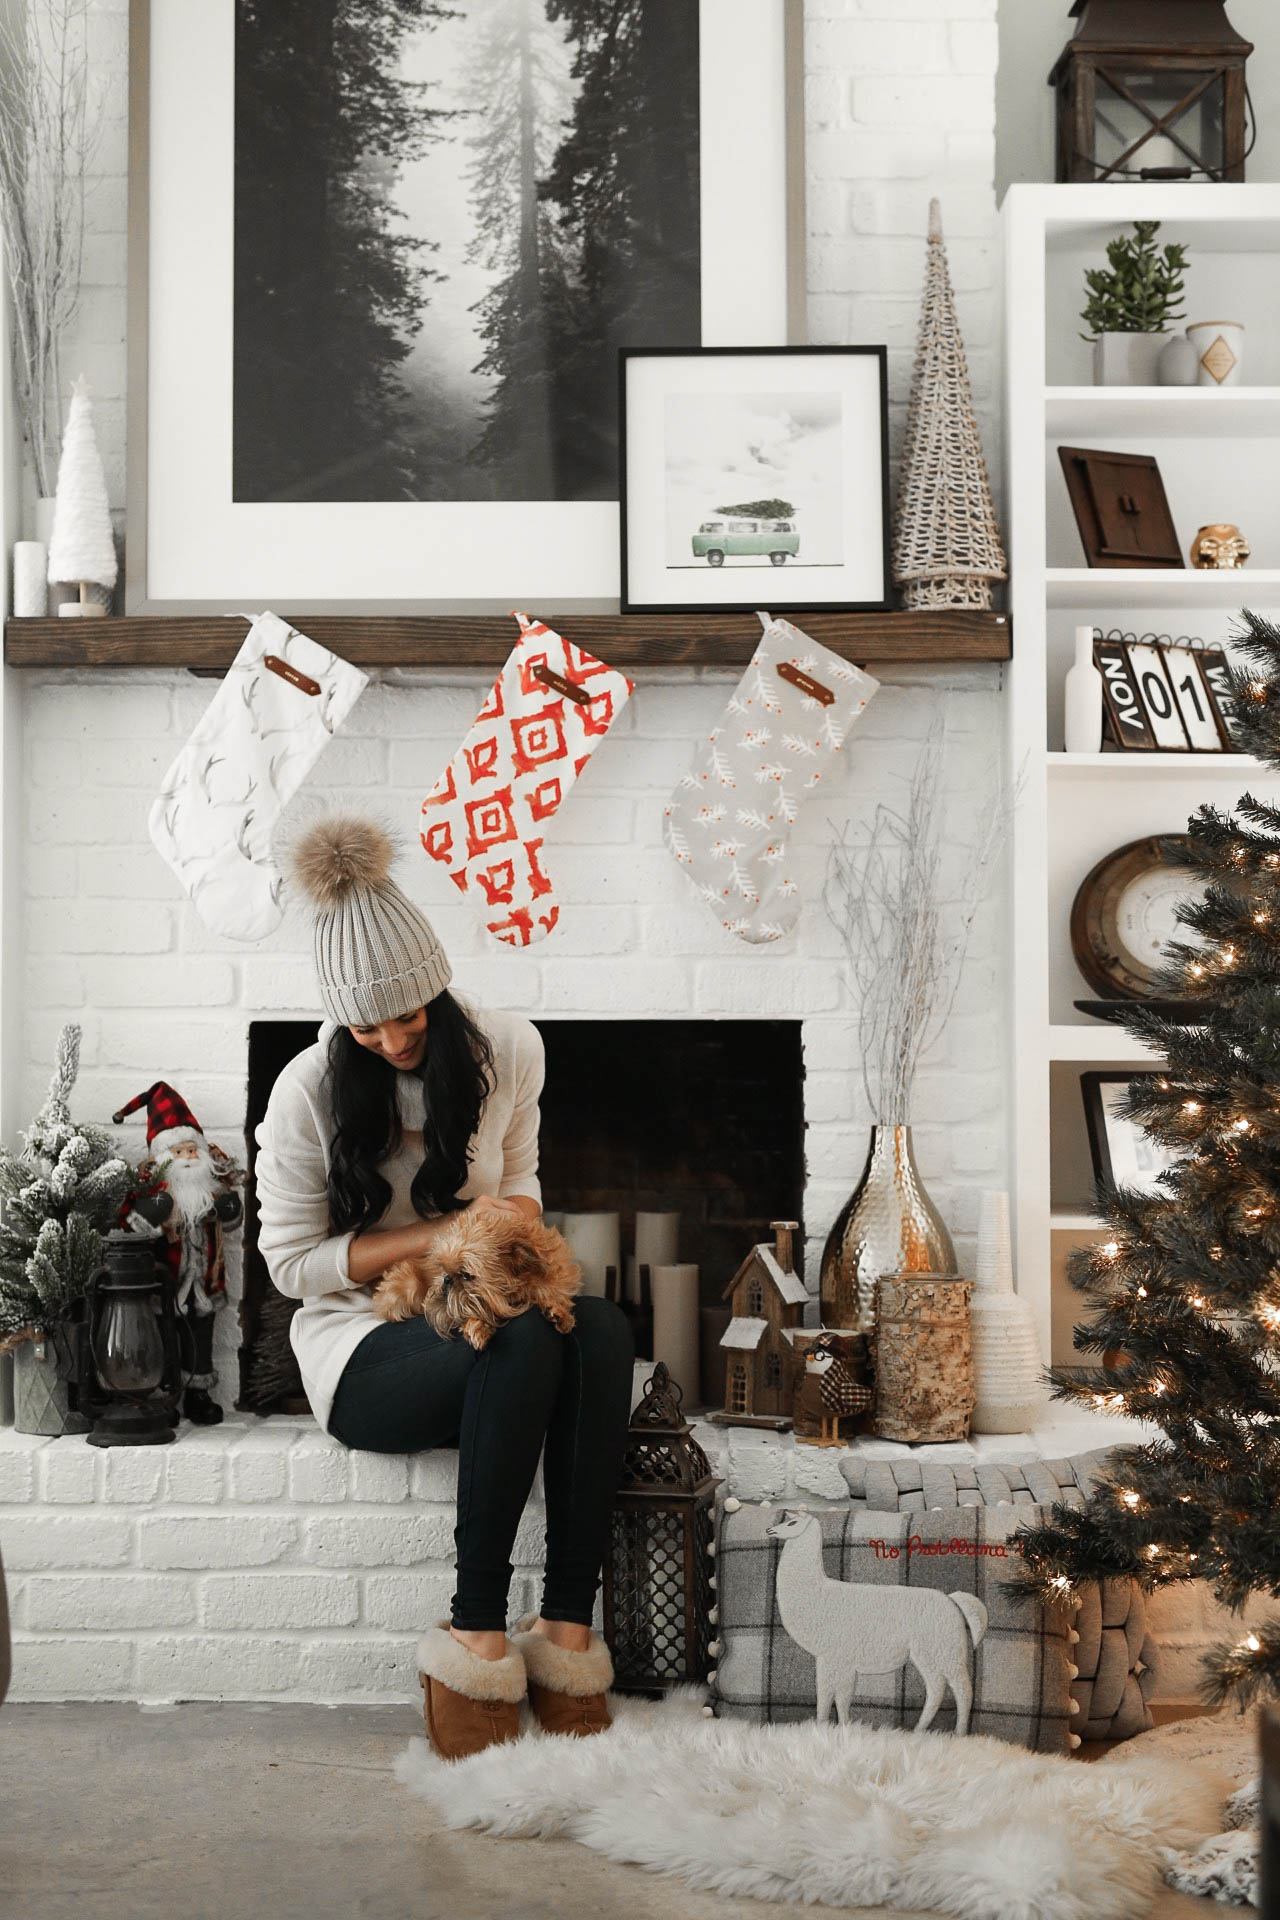 DTKAustin is sharing tips on how to pick the perfect wall art for large living spaces with Minted for the holidays.